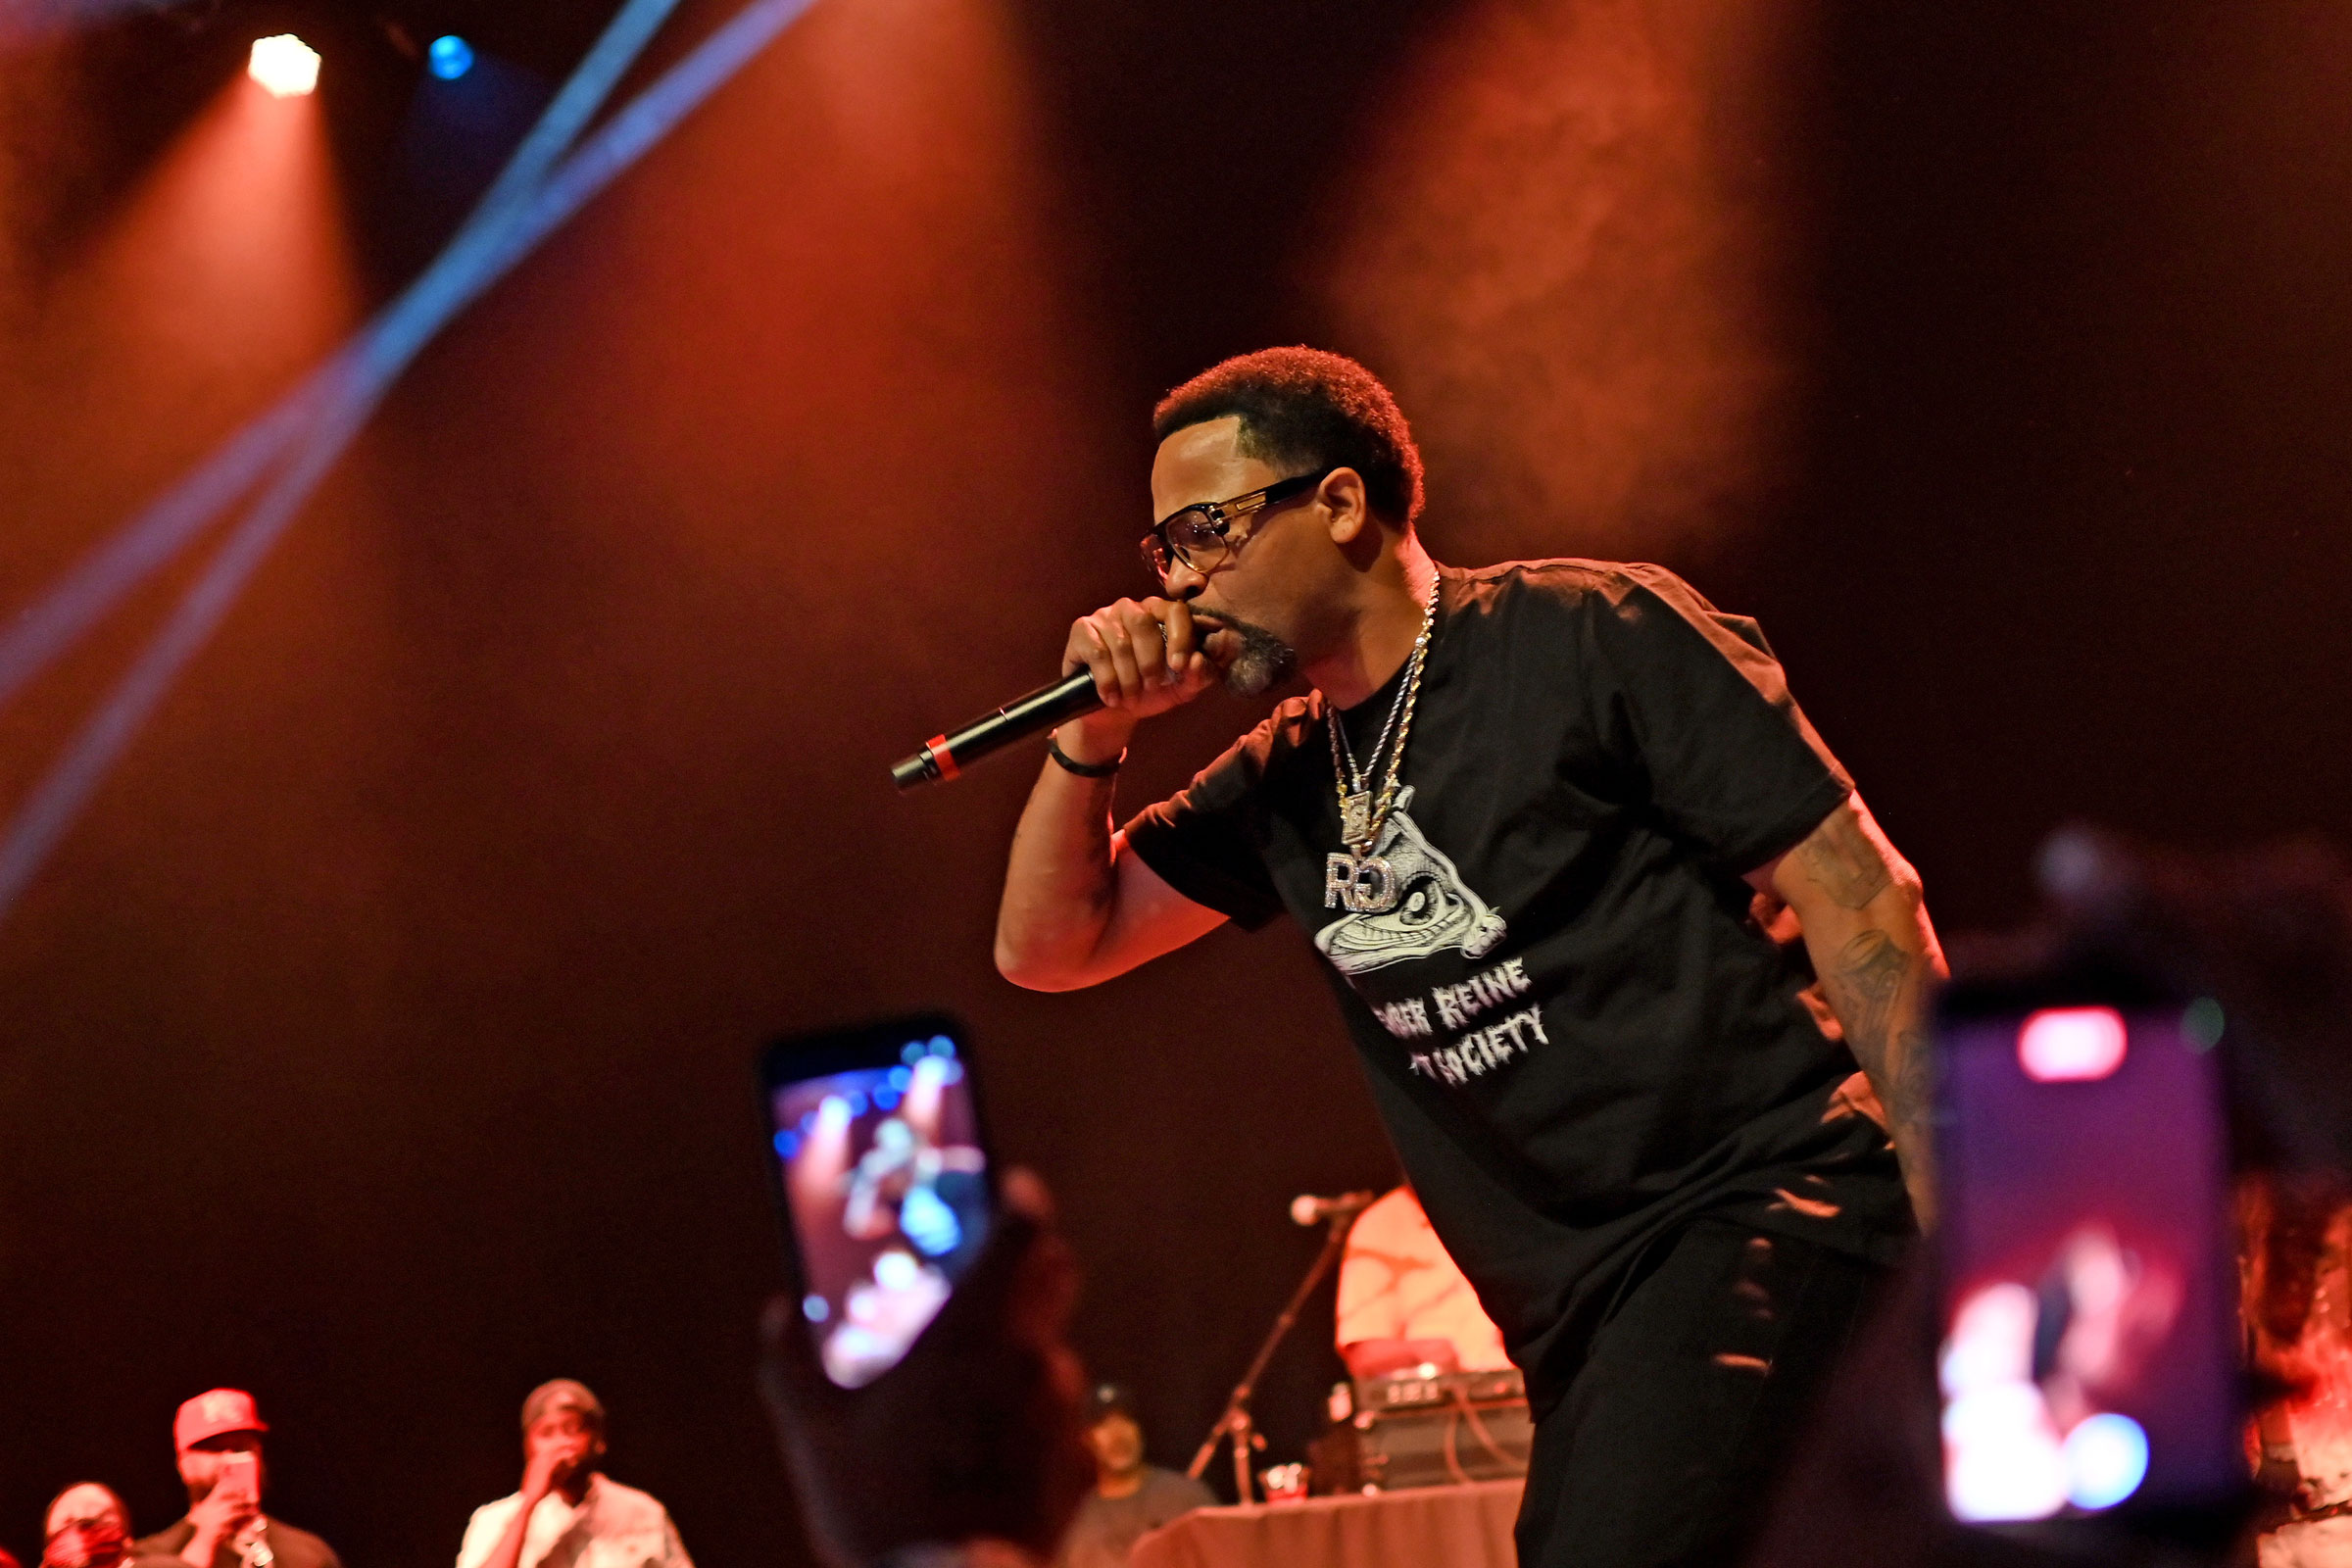 LOUISVILLE, KENTUCKY - SEPTEMBER 25: Juvenile performs at Old Forester's Paristown Hall on September 25, 2021 in Louisville, Kentucky. (Photo by Stephen J. Cohen/Getty Images) (Getty Images—2021 Stephen J. Cohen)